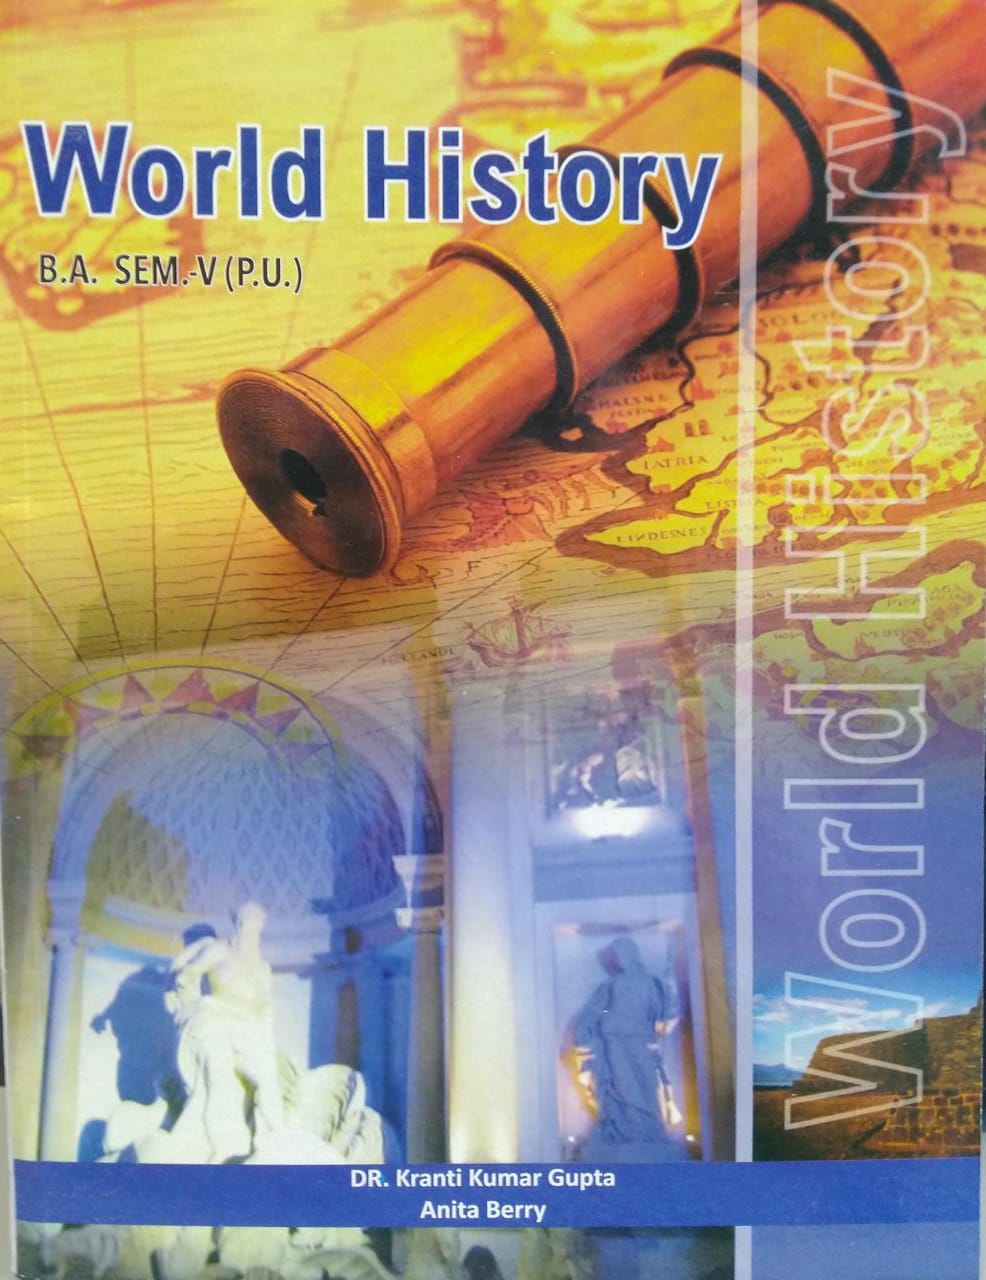 World history for Semester-V B.A. (P.U.) by Dr. K.K. Gupta and Anita Berry (Mohindra Publishng house) for Panjab University Edition 2022